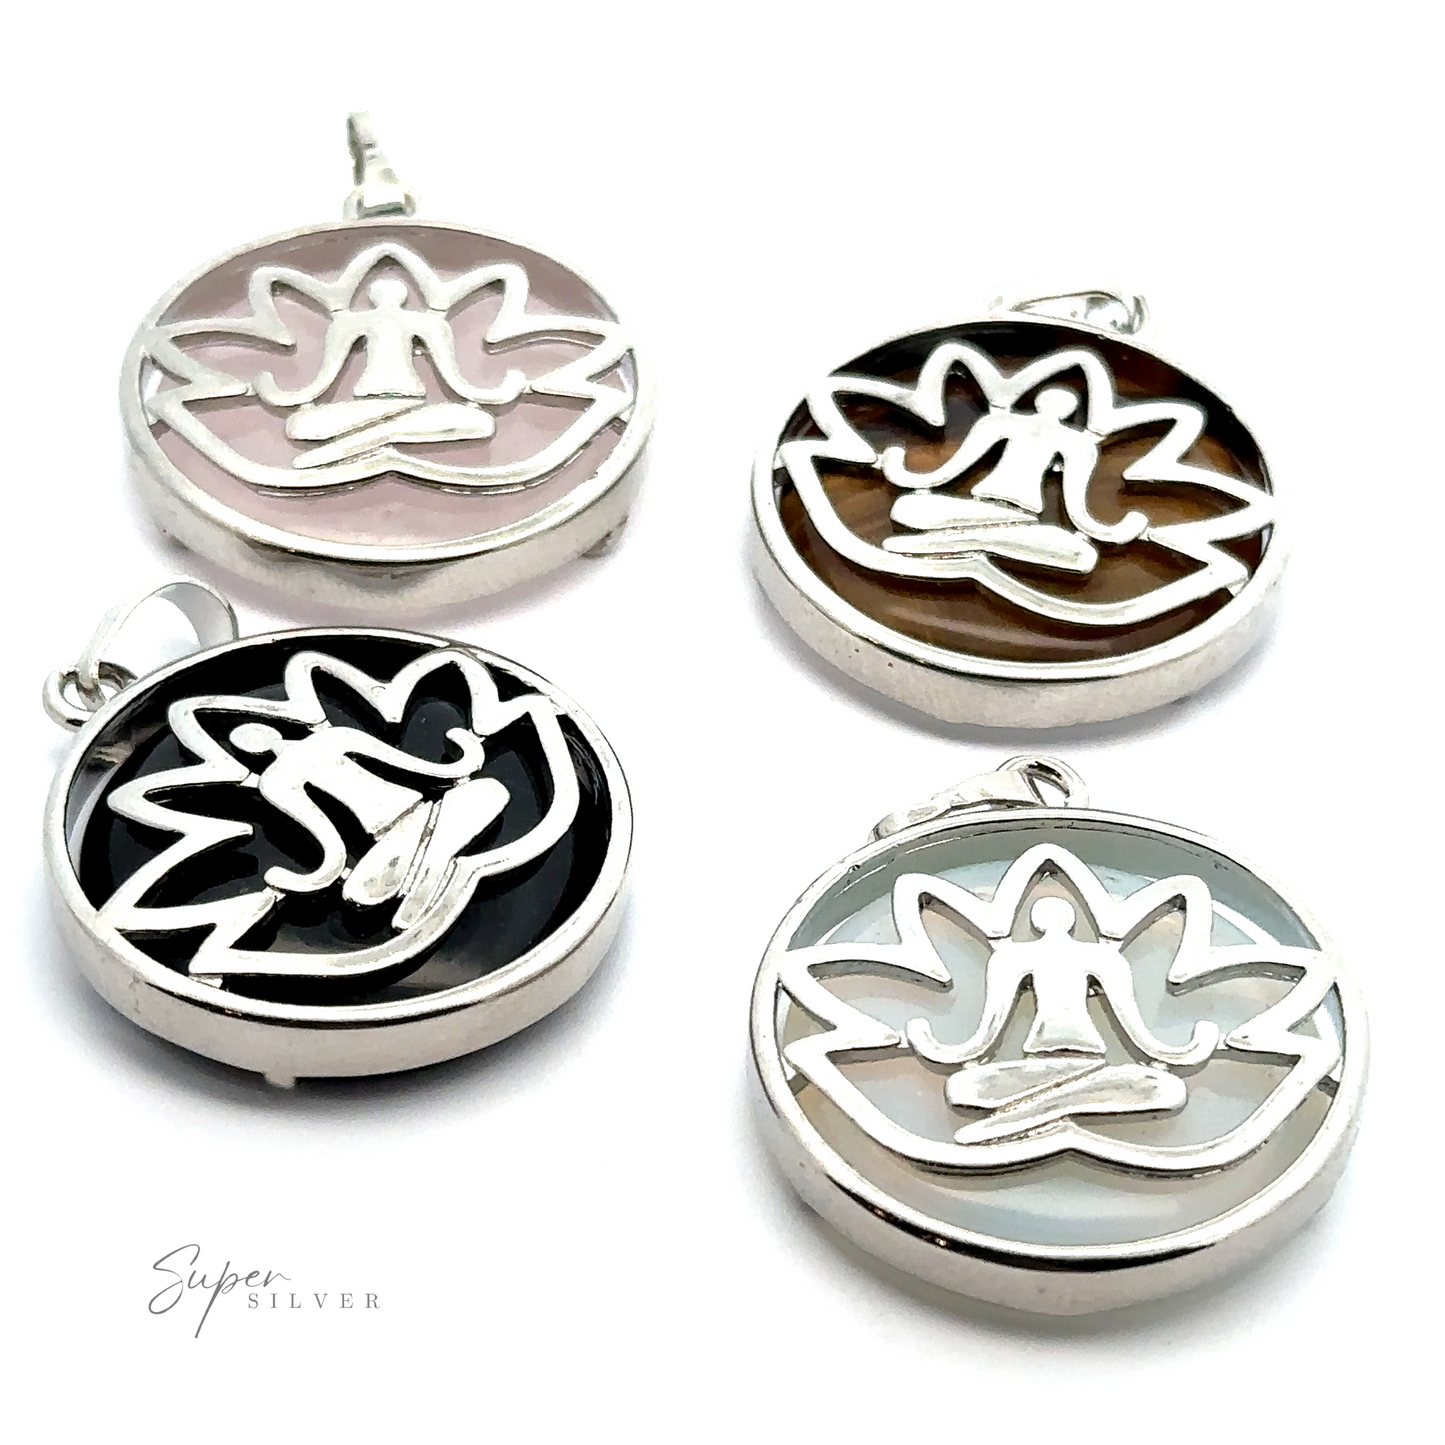 Four Silver Plated Lotus Meditation Pendants with Gemstone, each featuring a seated figure in a meditation pose. The pendants have different colored backgrounds: pink, brown, black, and white.